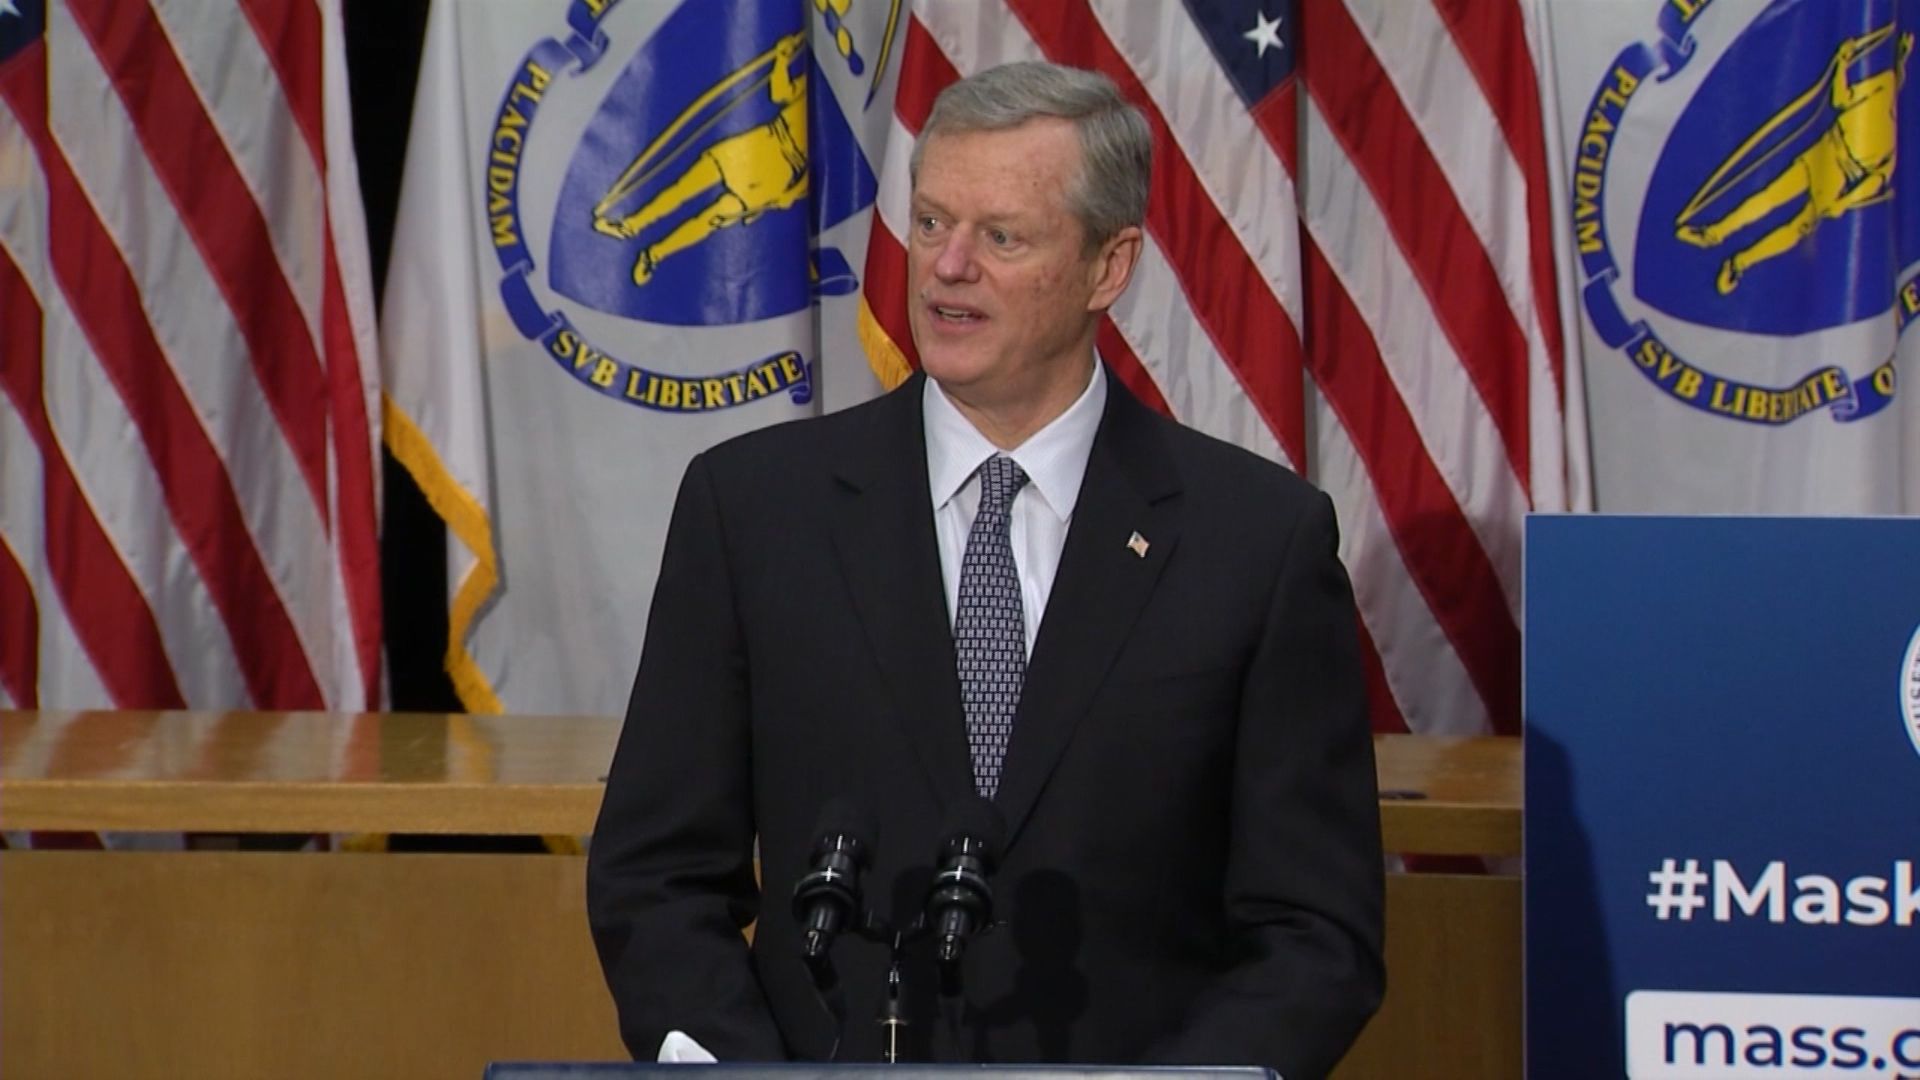 Gov. Baker refuses to take responsibility for confusing ...